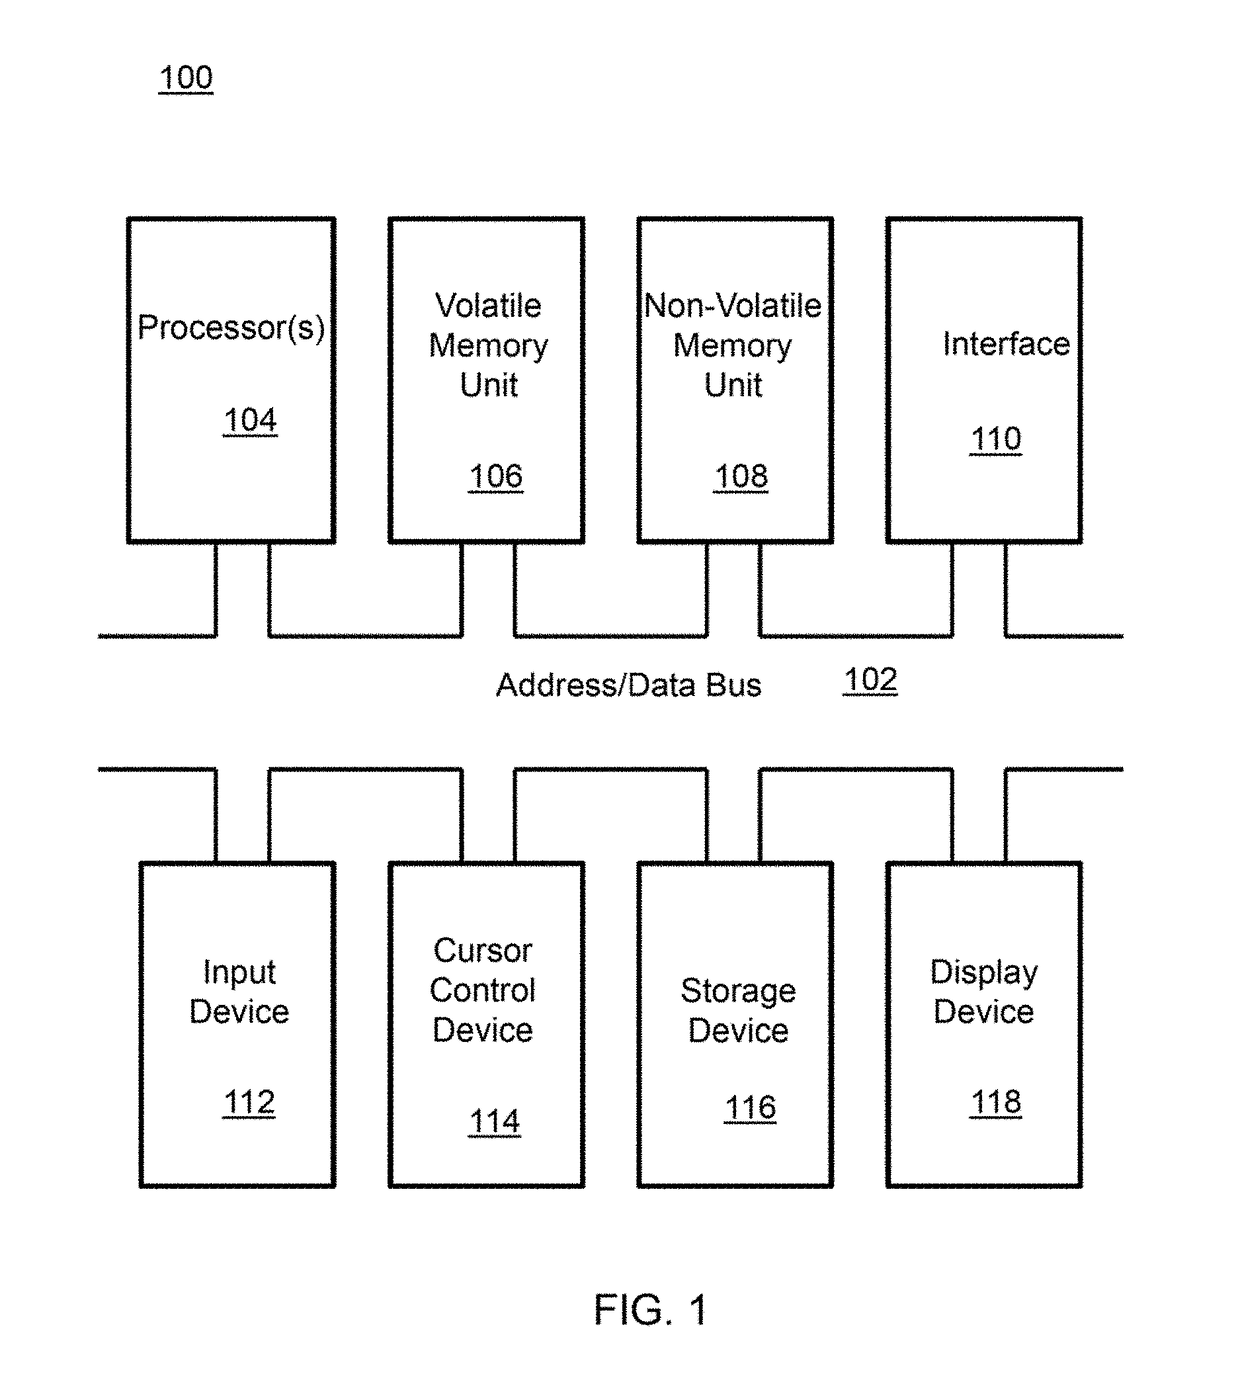 System and method for achieving fast and reliable time-to-contact estimation using vision and range sensor data for autonomous navigation